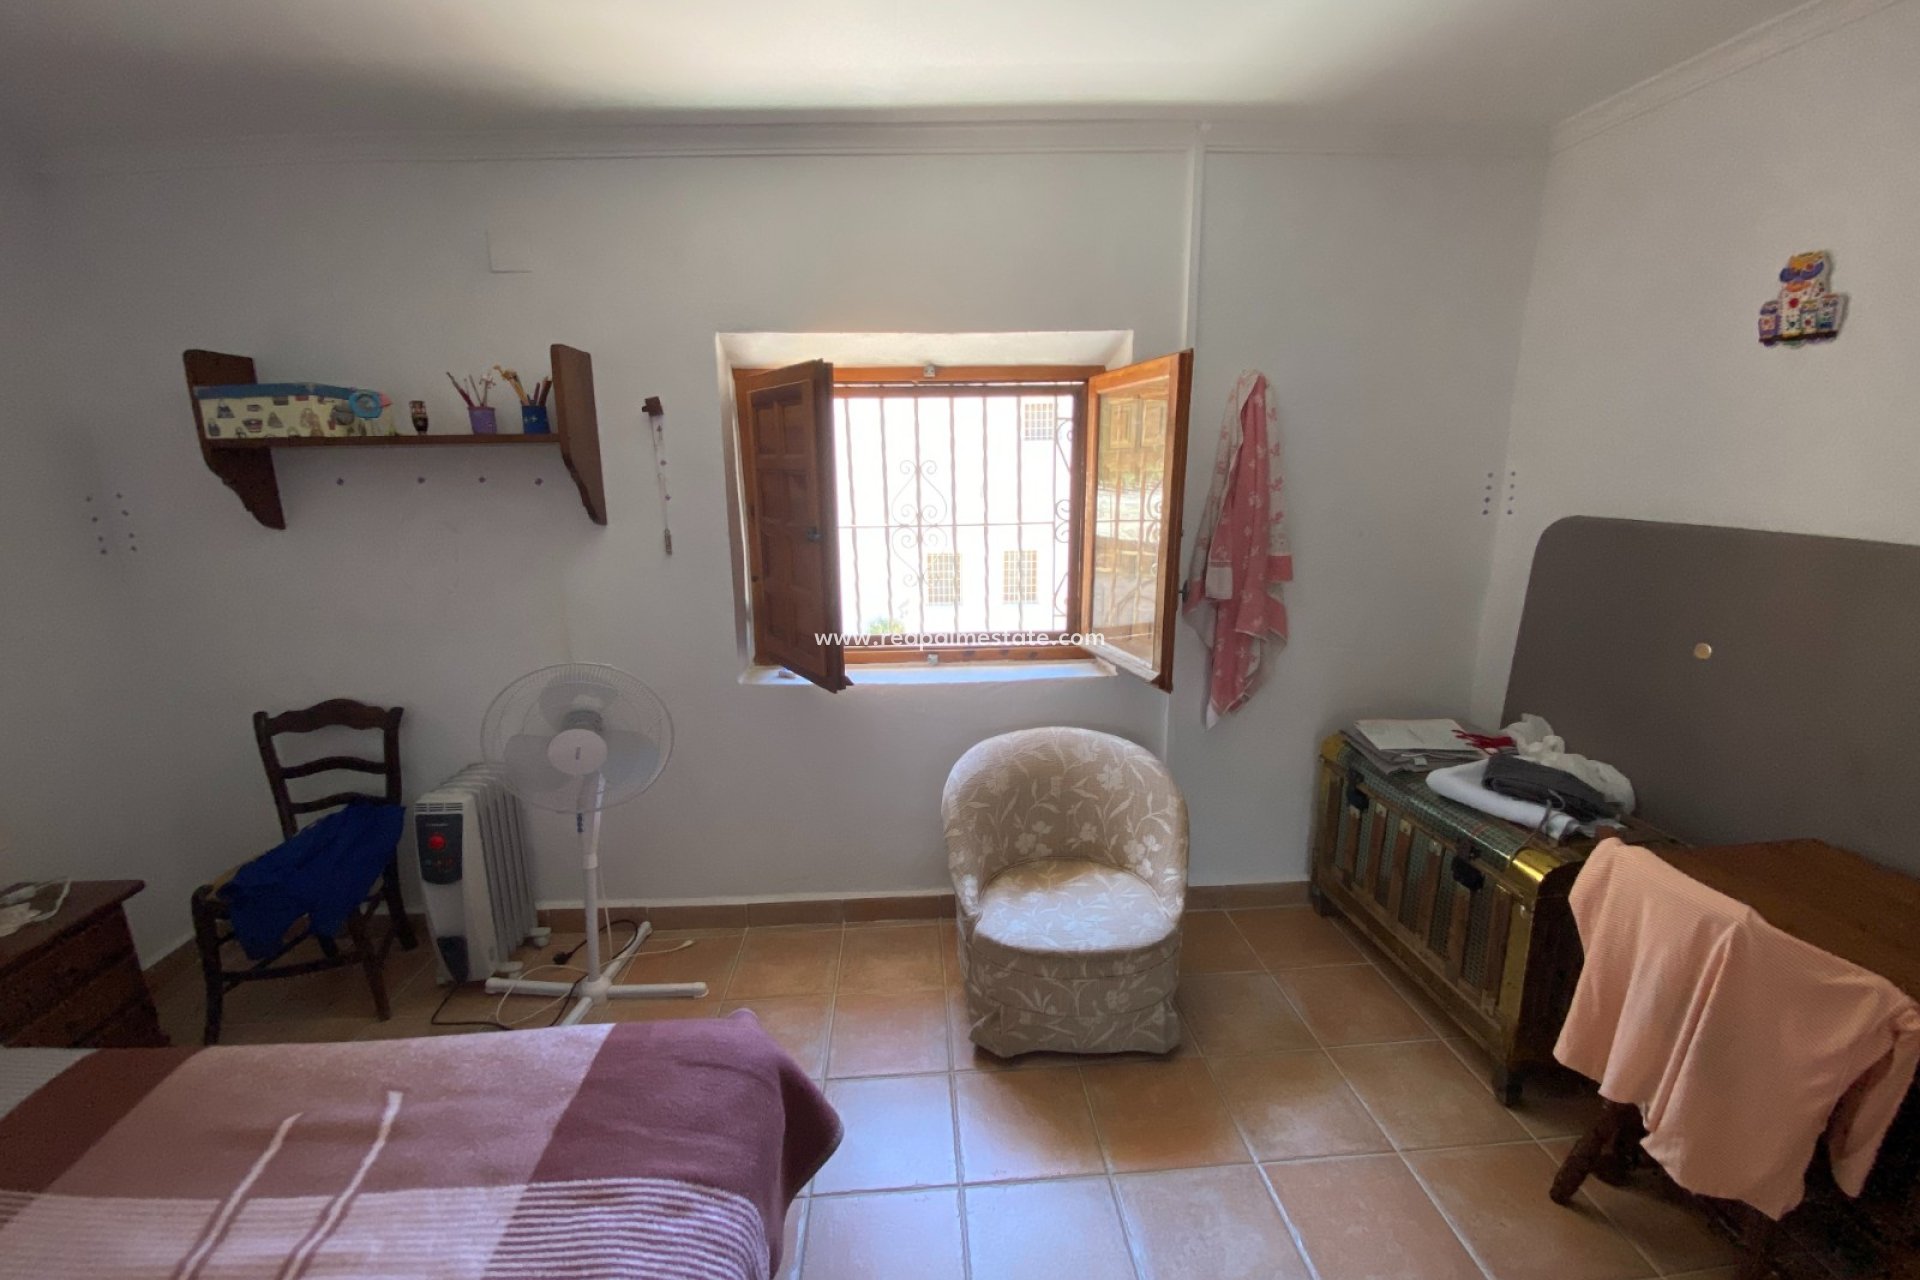 Resale - Country House -
Salinas